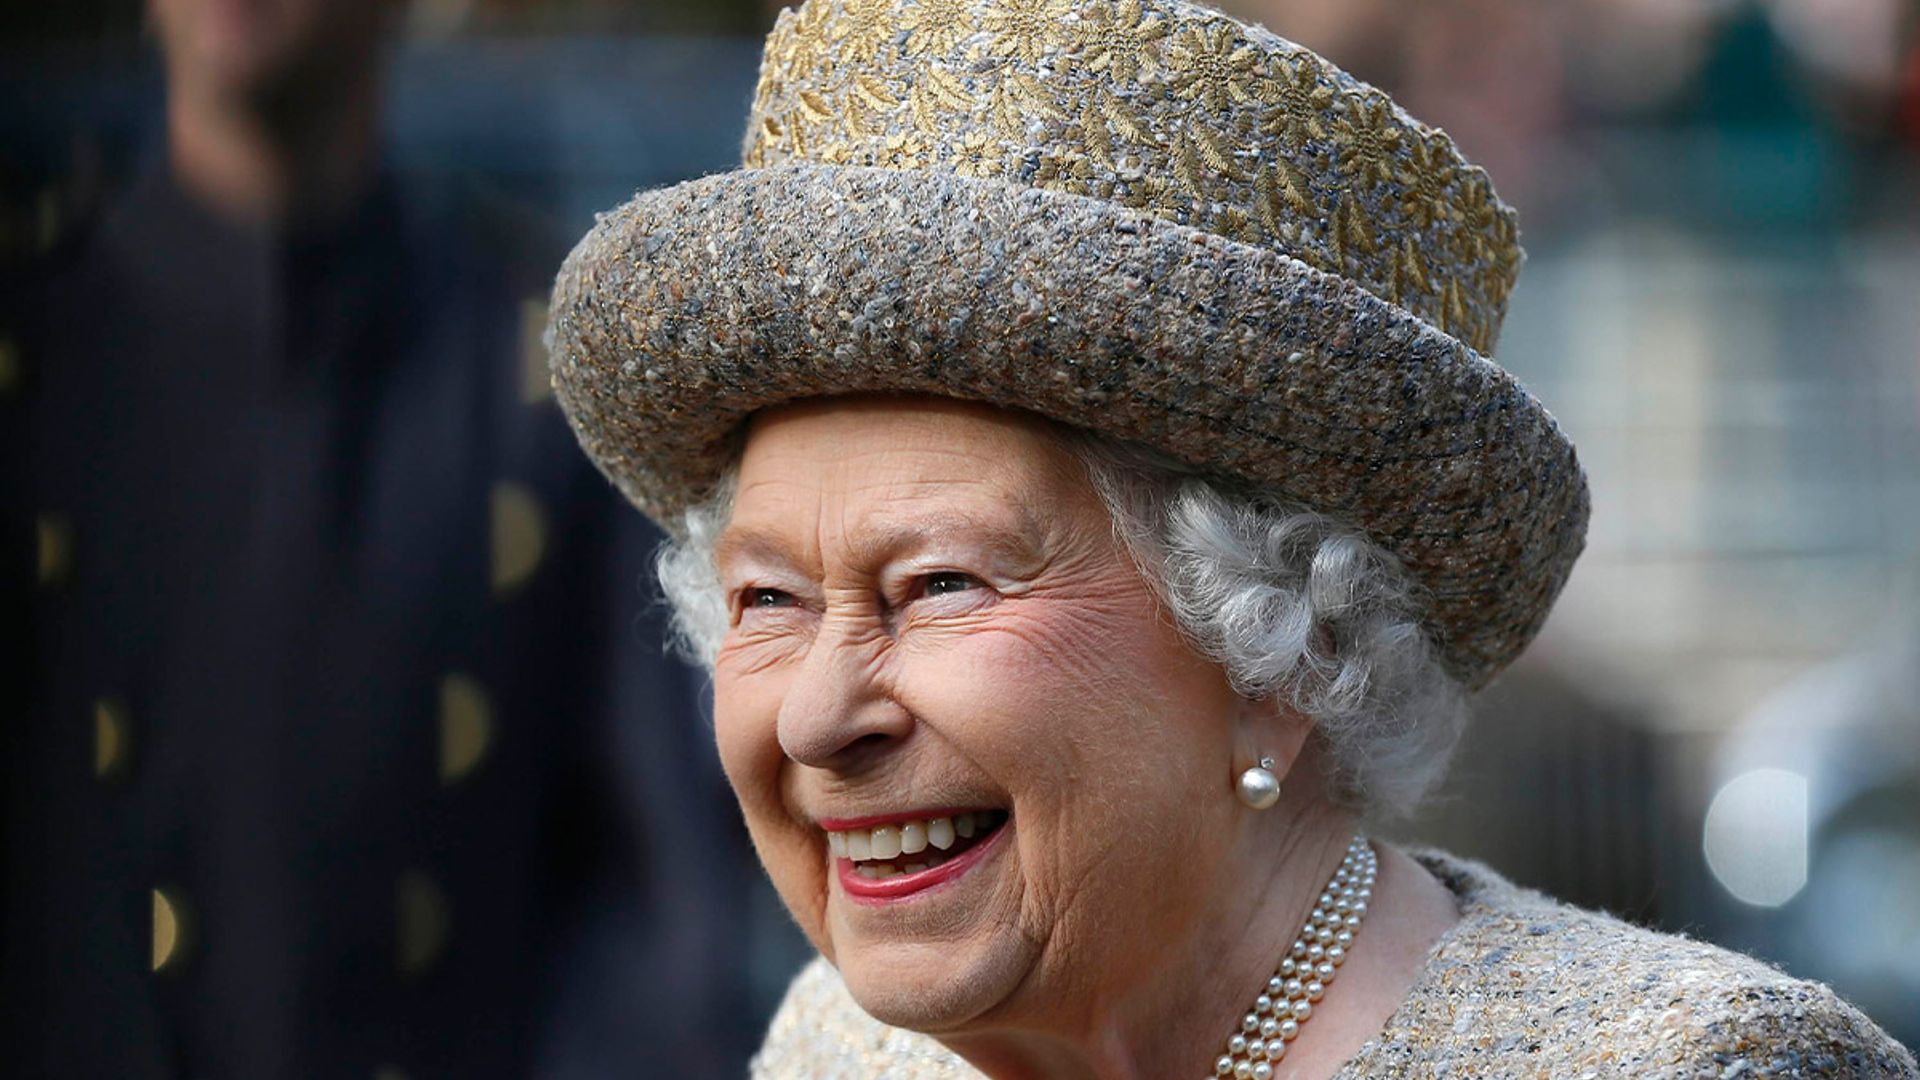 The Queen's home looks magical in surprising new photos